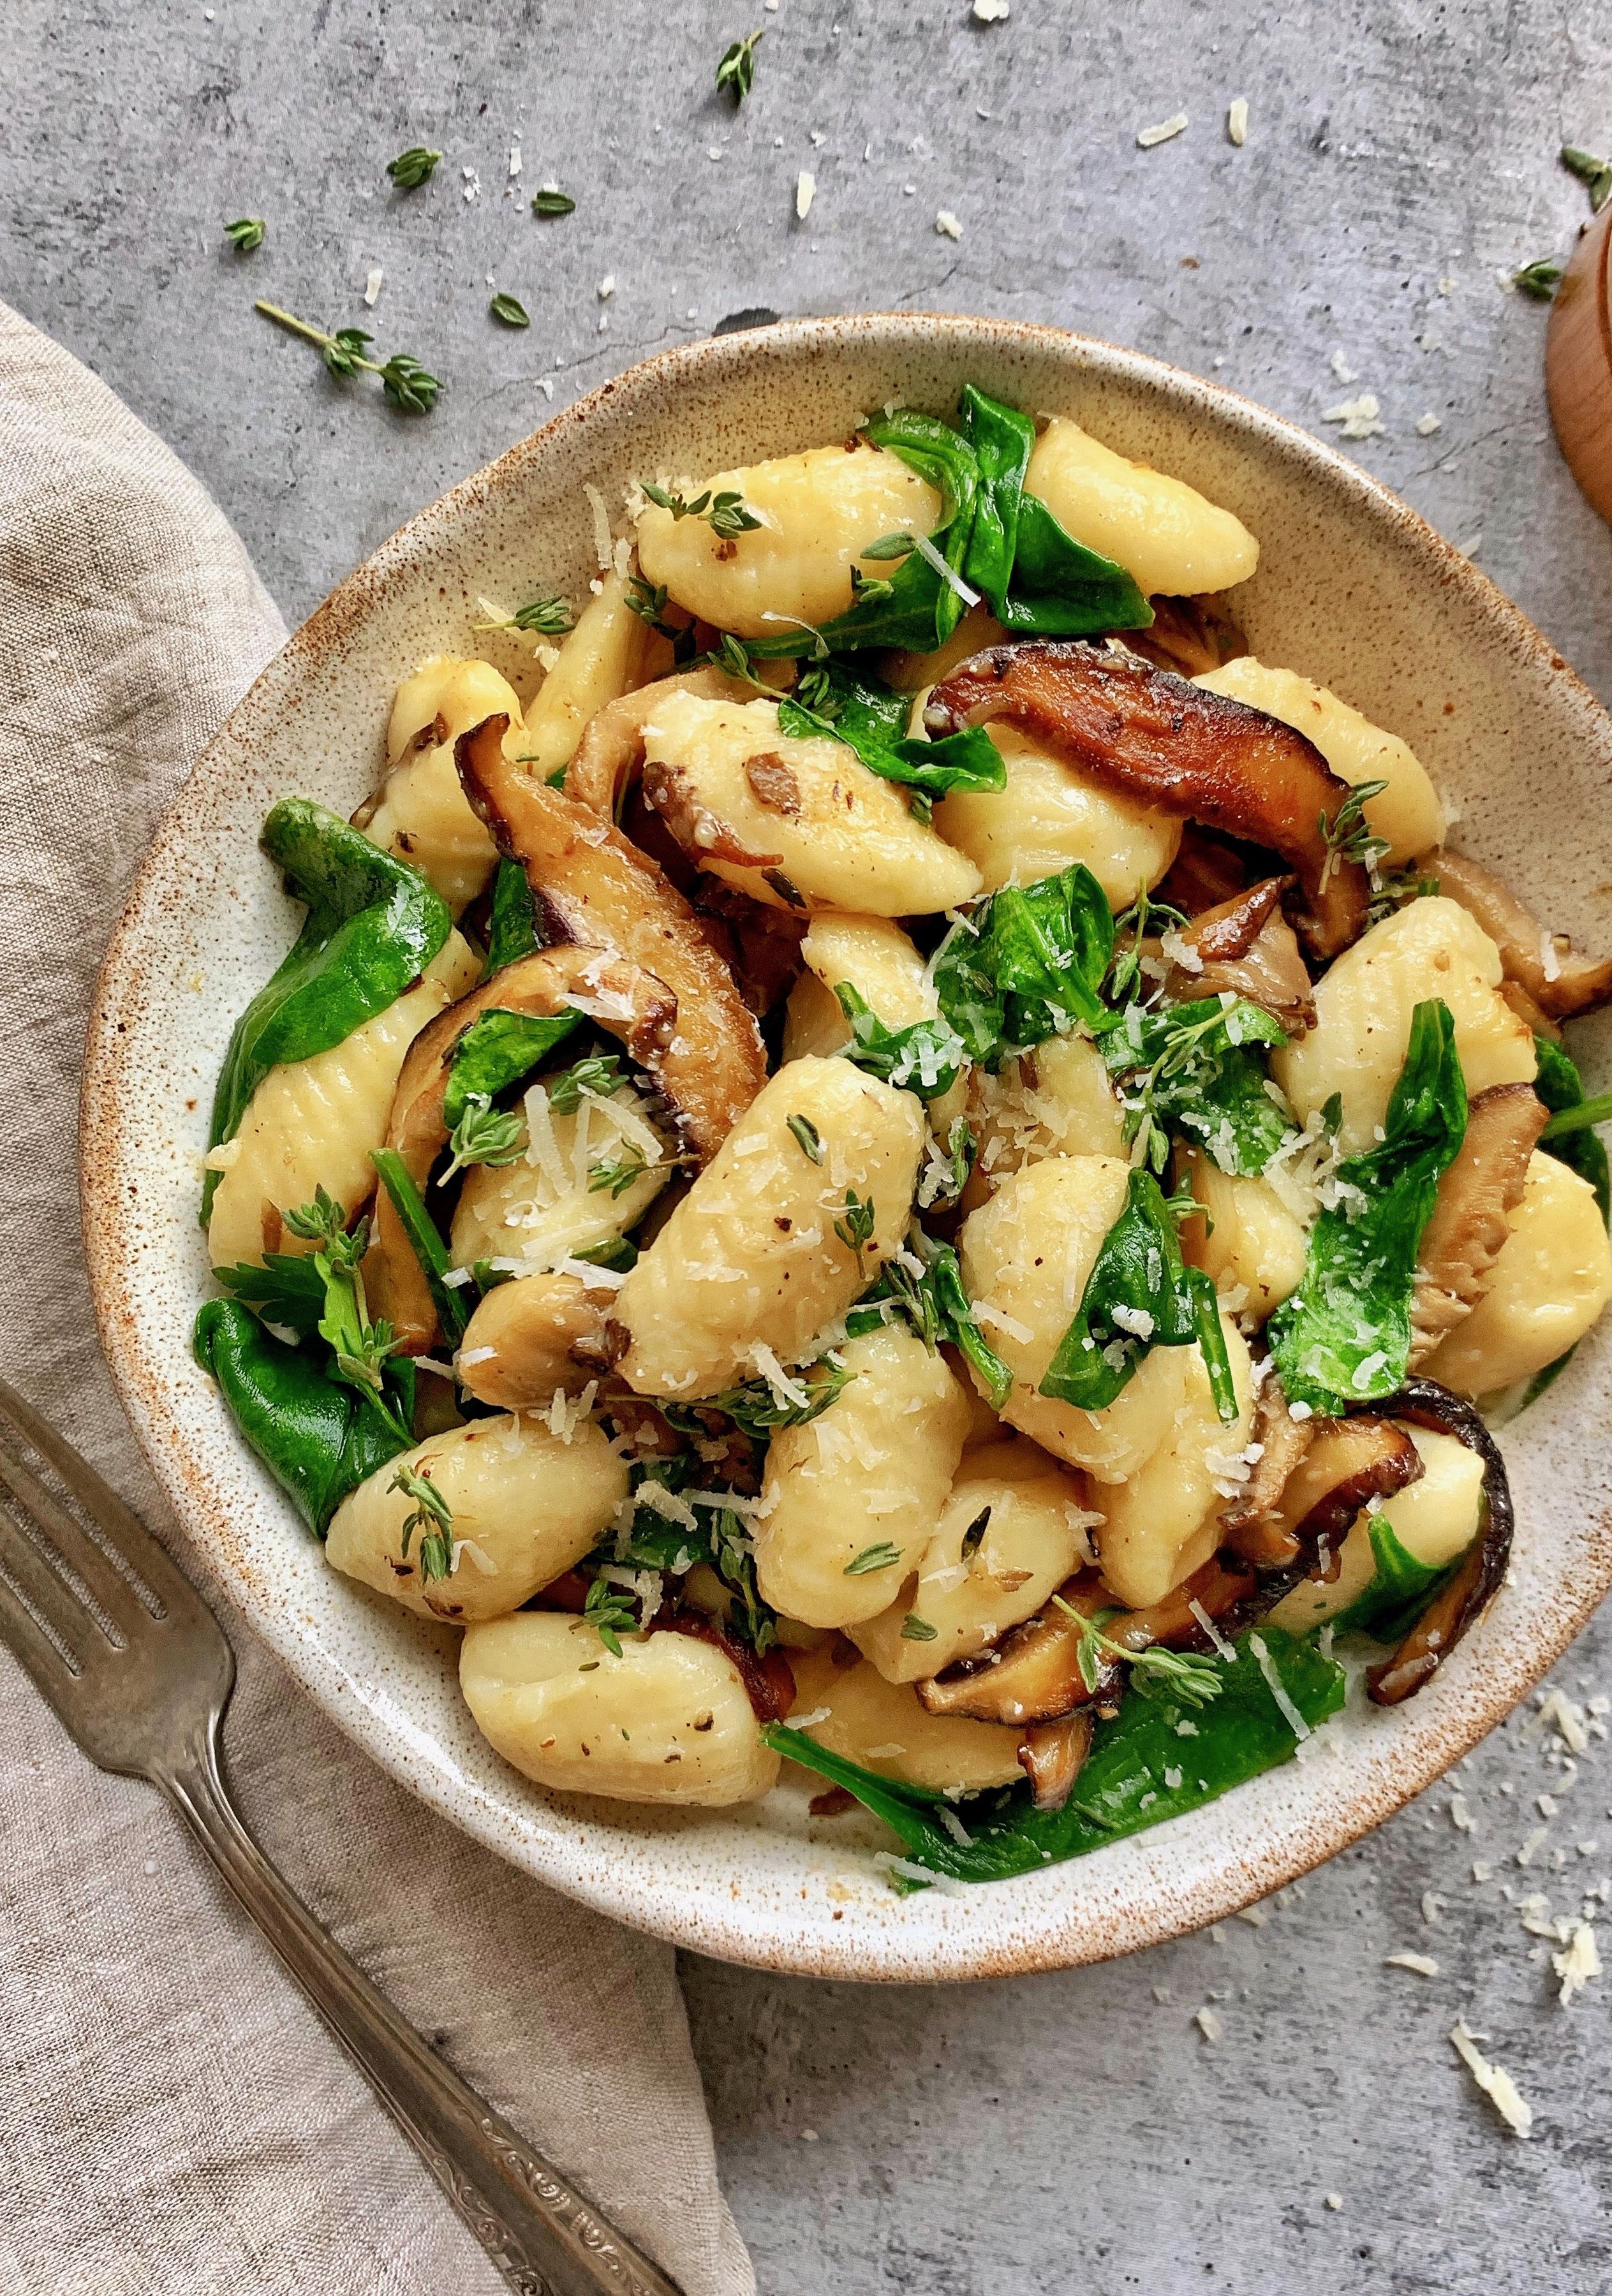 Potato Gnocchi With Sauteed Mushrooms And Spinach Recipe By Jake Cohen The Feedfeed,Hillshire Farms Smoked Sausage Recipes